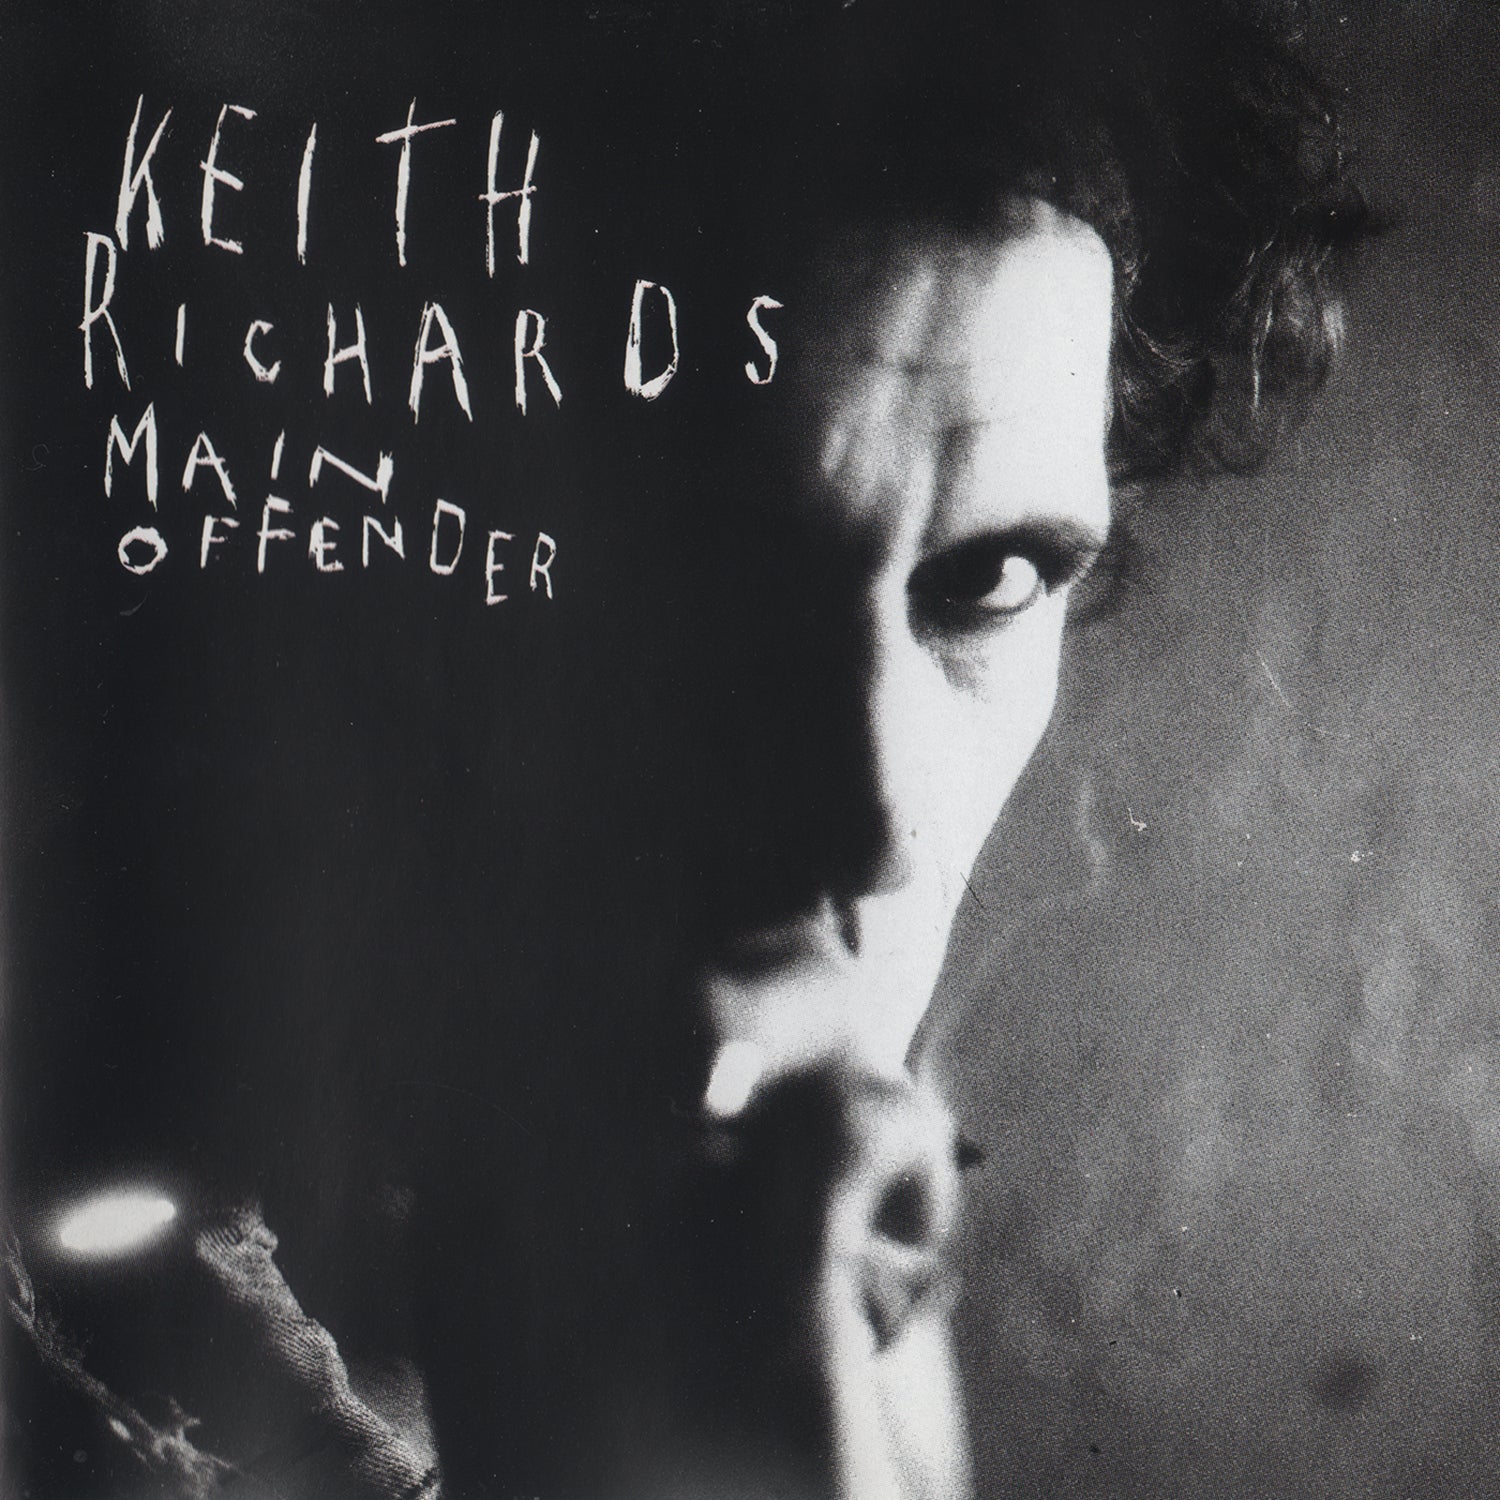 Keith Richards | Main Offender (Deluxe Edition Boxset) | Vinyl - 0